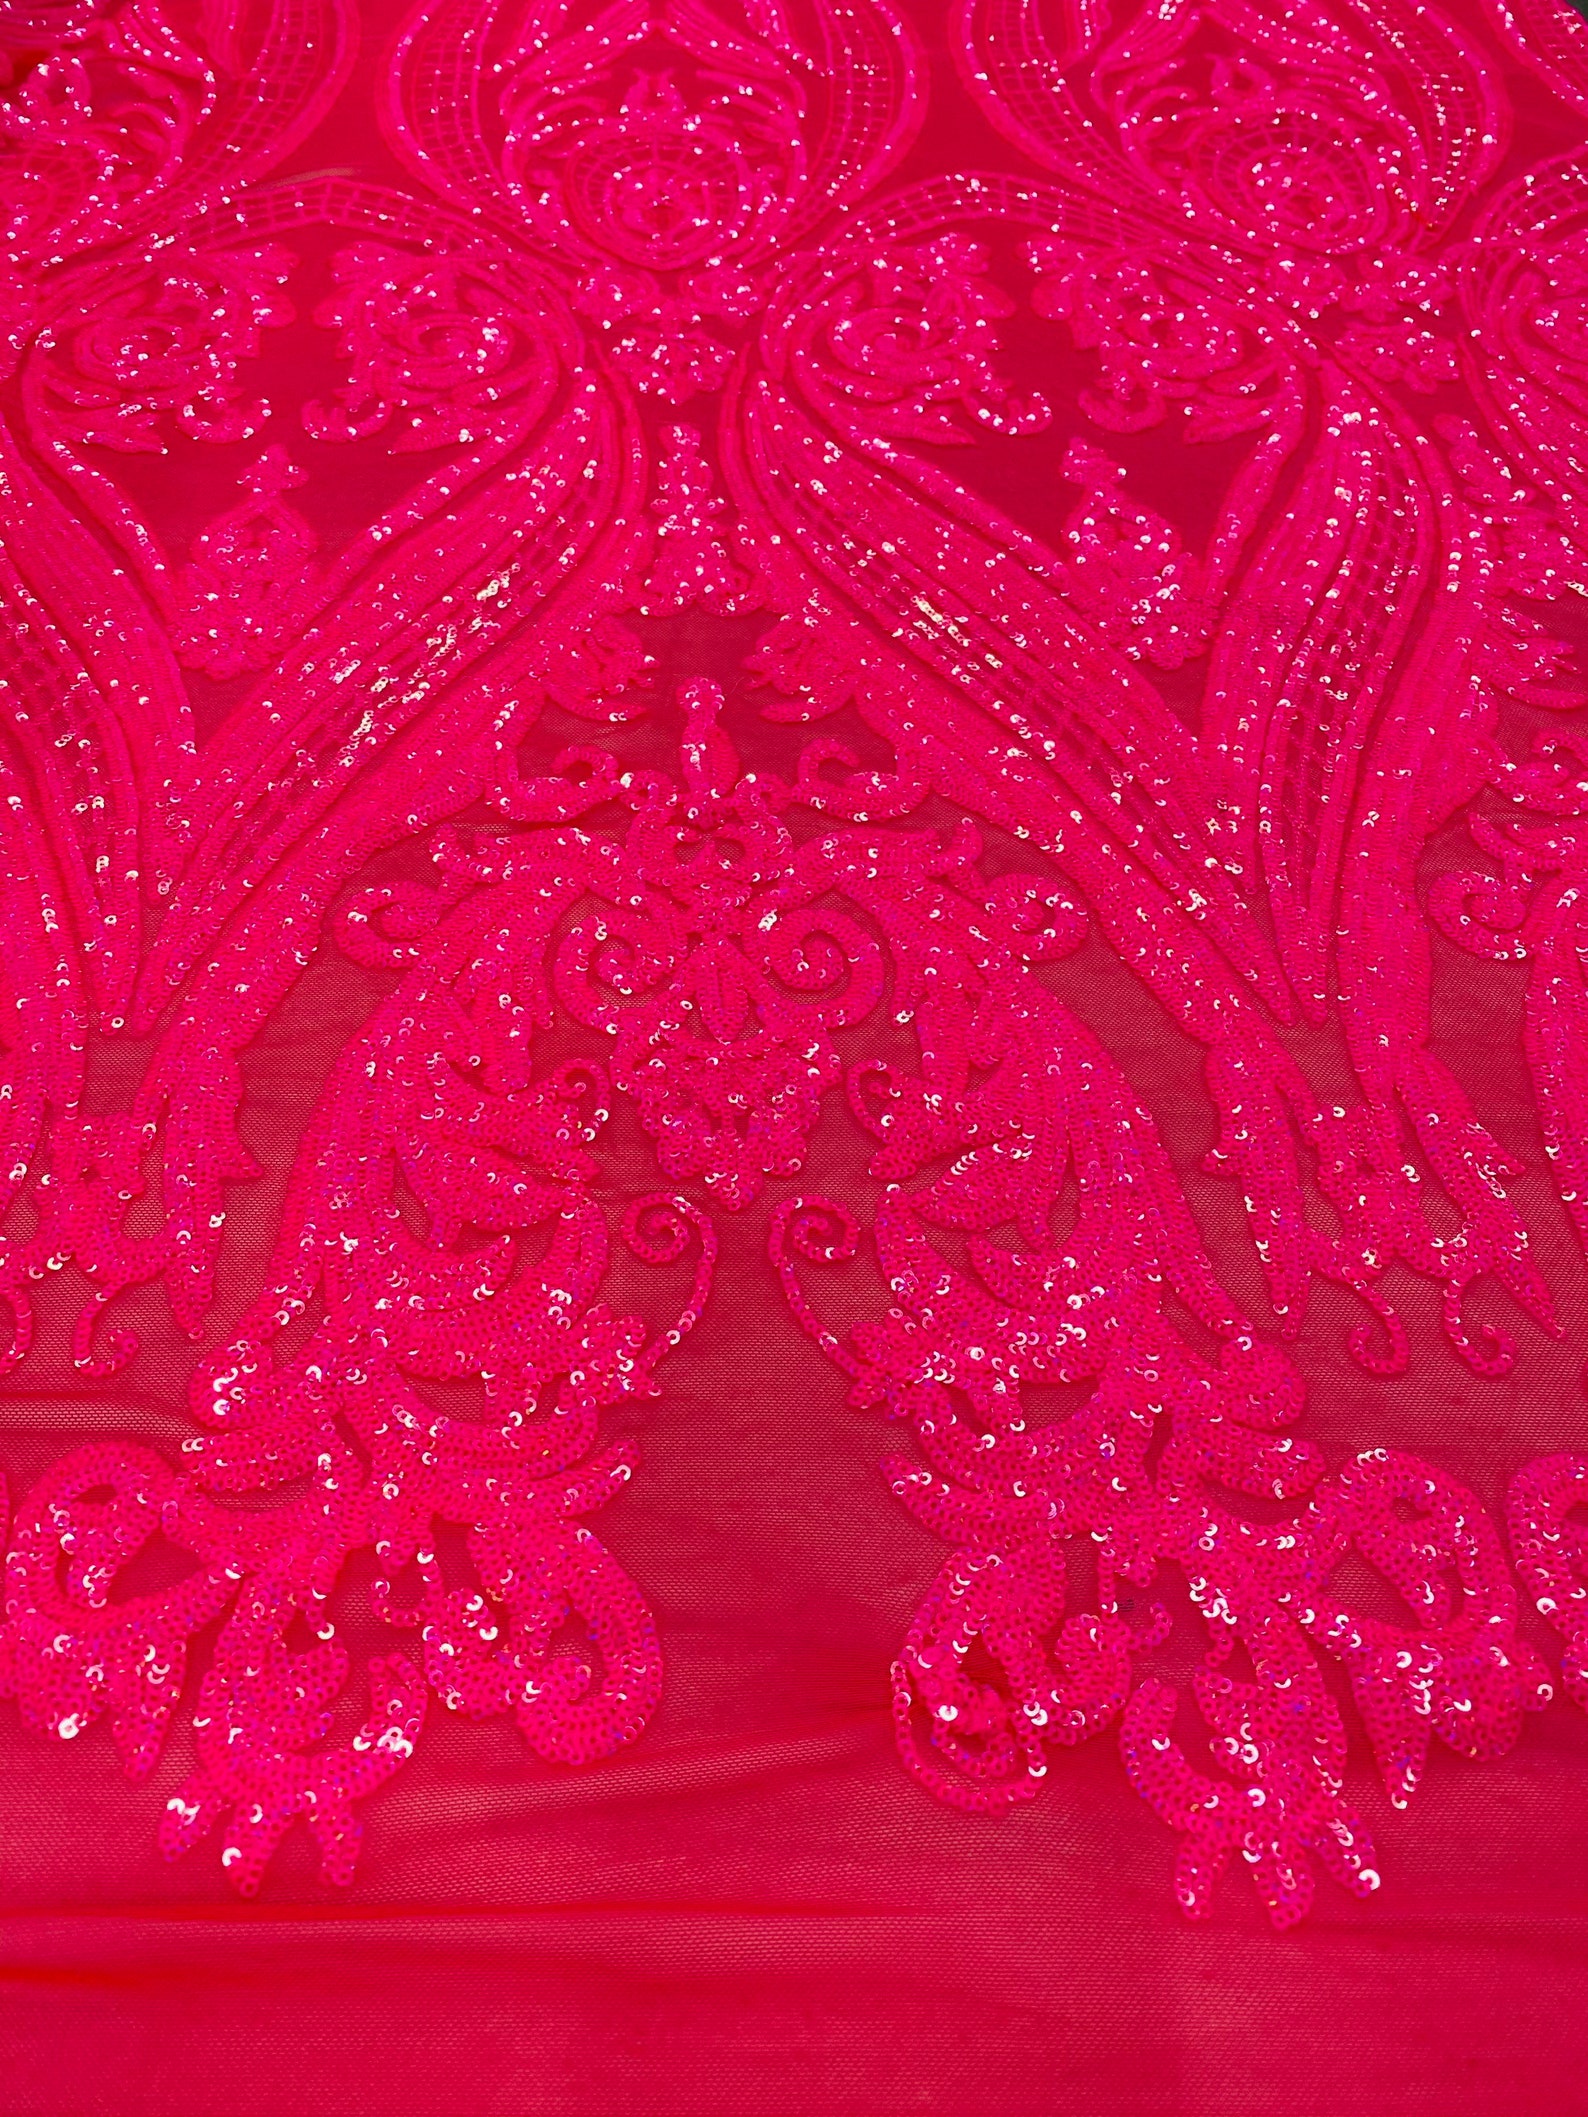 Neon Hot Pink Embroidered Sequins Fabric 4 Way Stretch Fancy - Etsy